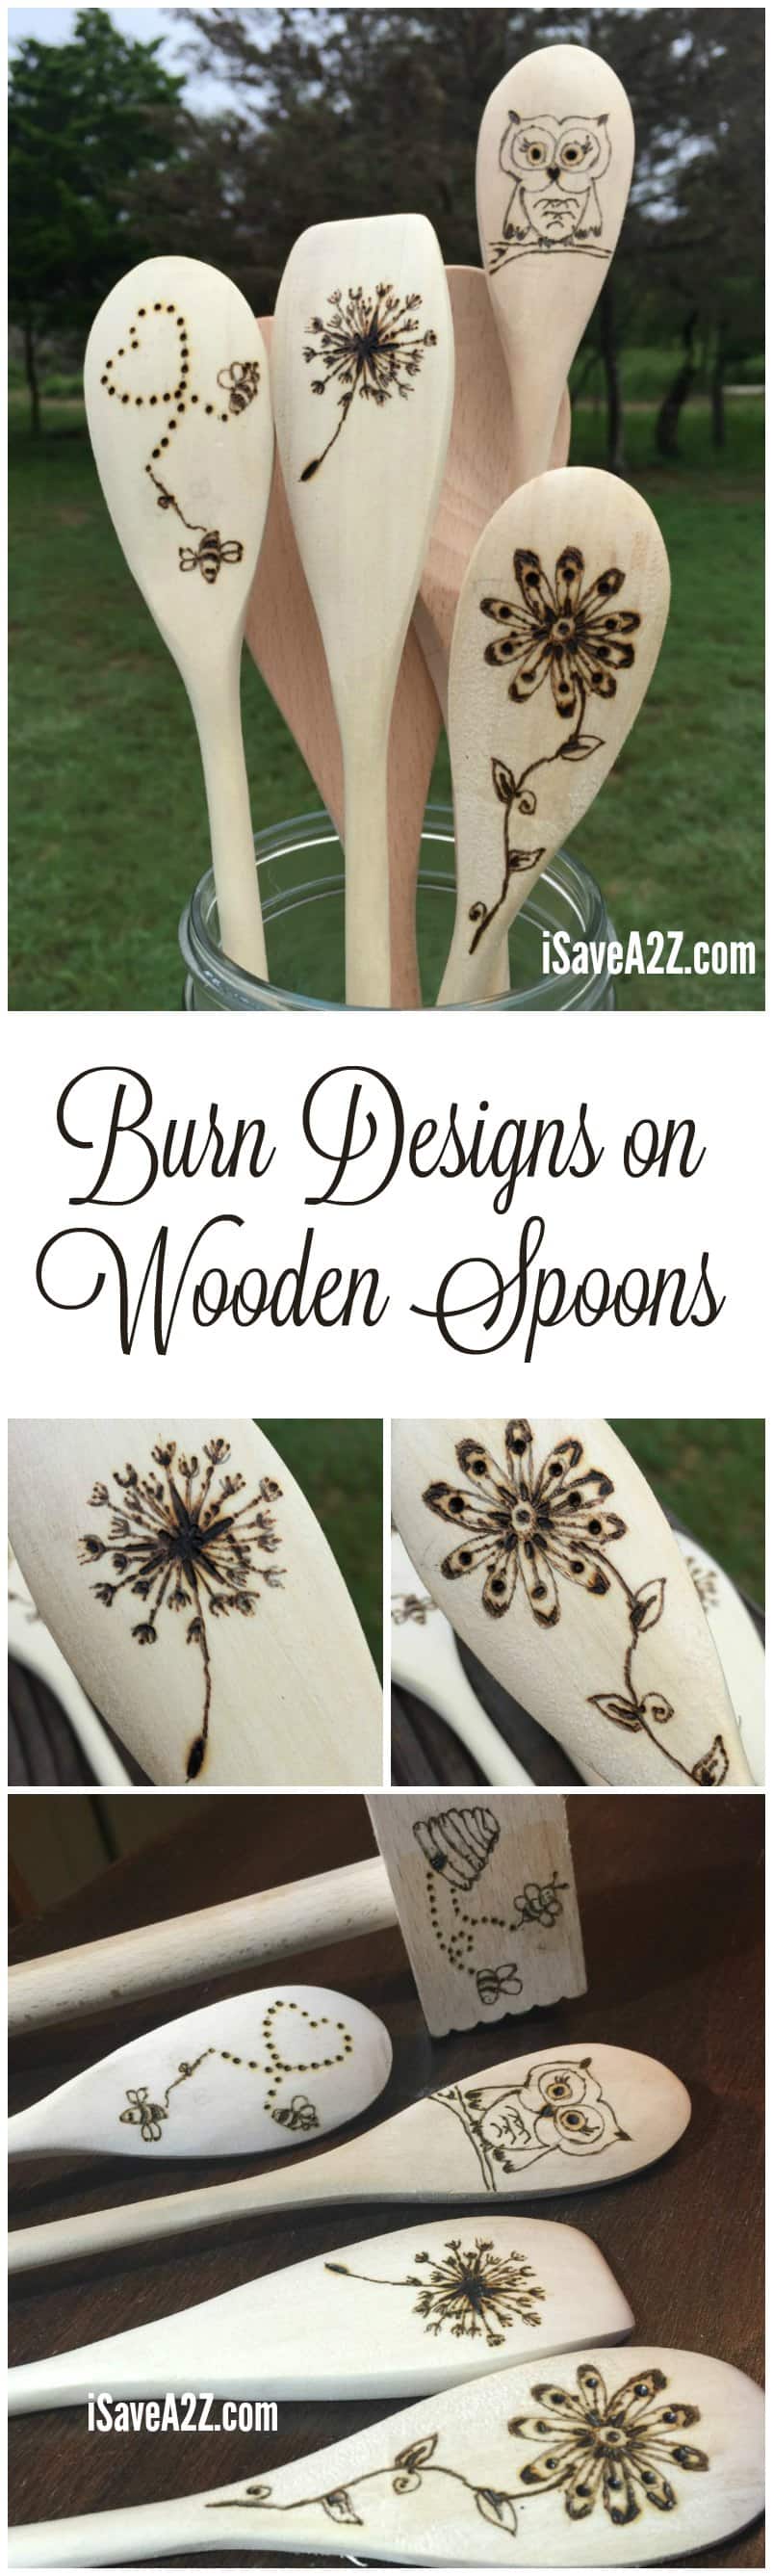 How to Burn Designs on Wooden Spoons